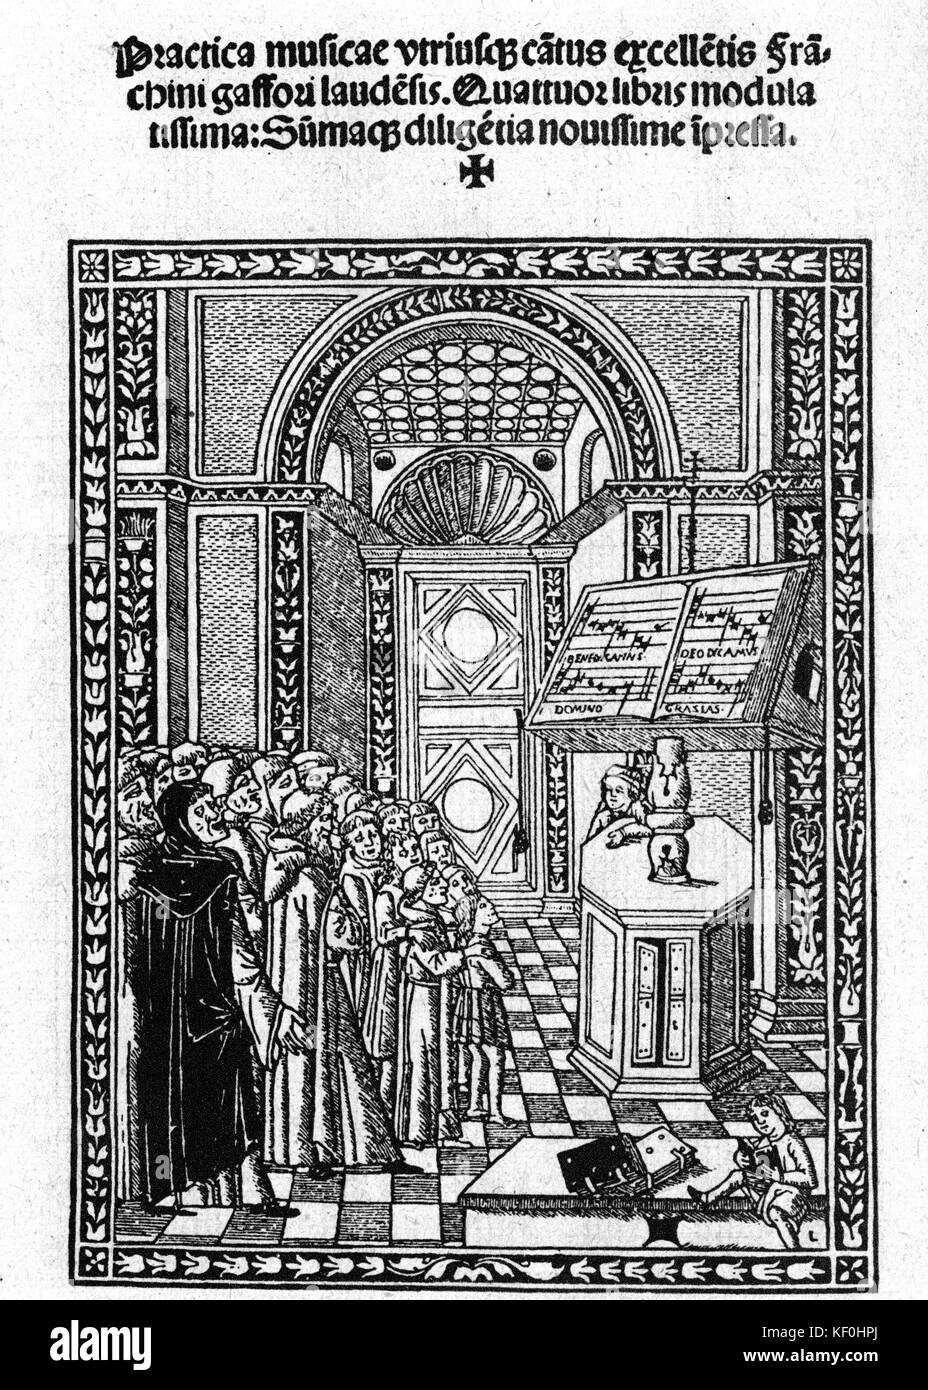 Frontispiece to 'Practica musicae' by di Gaffurio, published Venice 1512.  A chapel choir sings from sheet music on a lectern.  Franchini di Gaffurio Italian music theorist and composer 14 January 1451 - 25 June 1522. Stock Photo